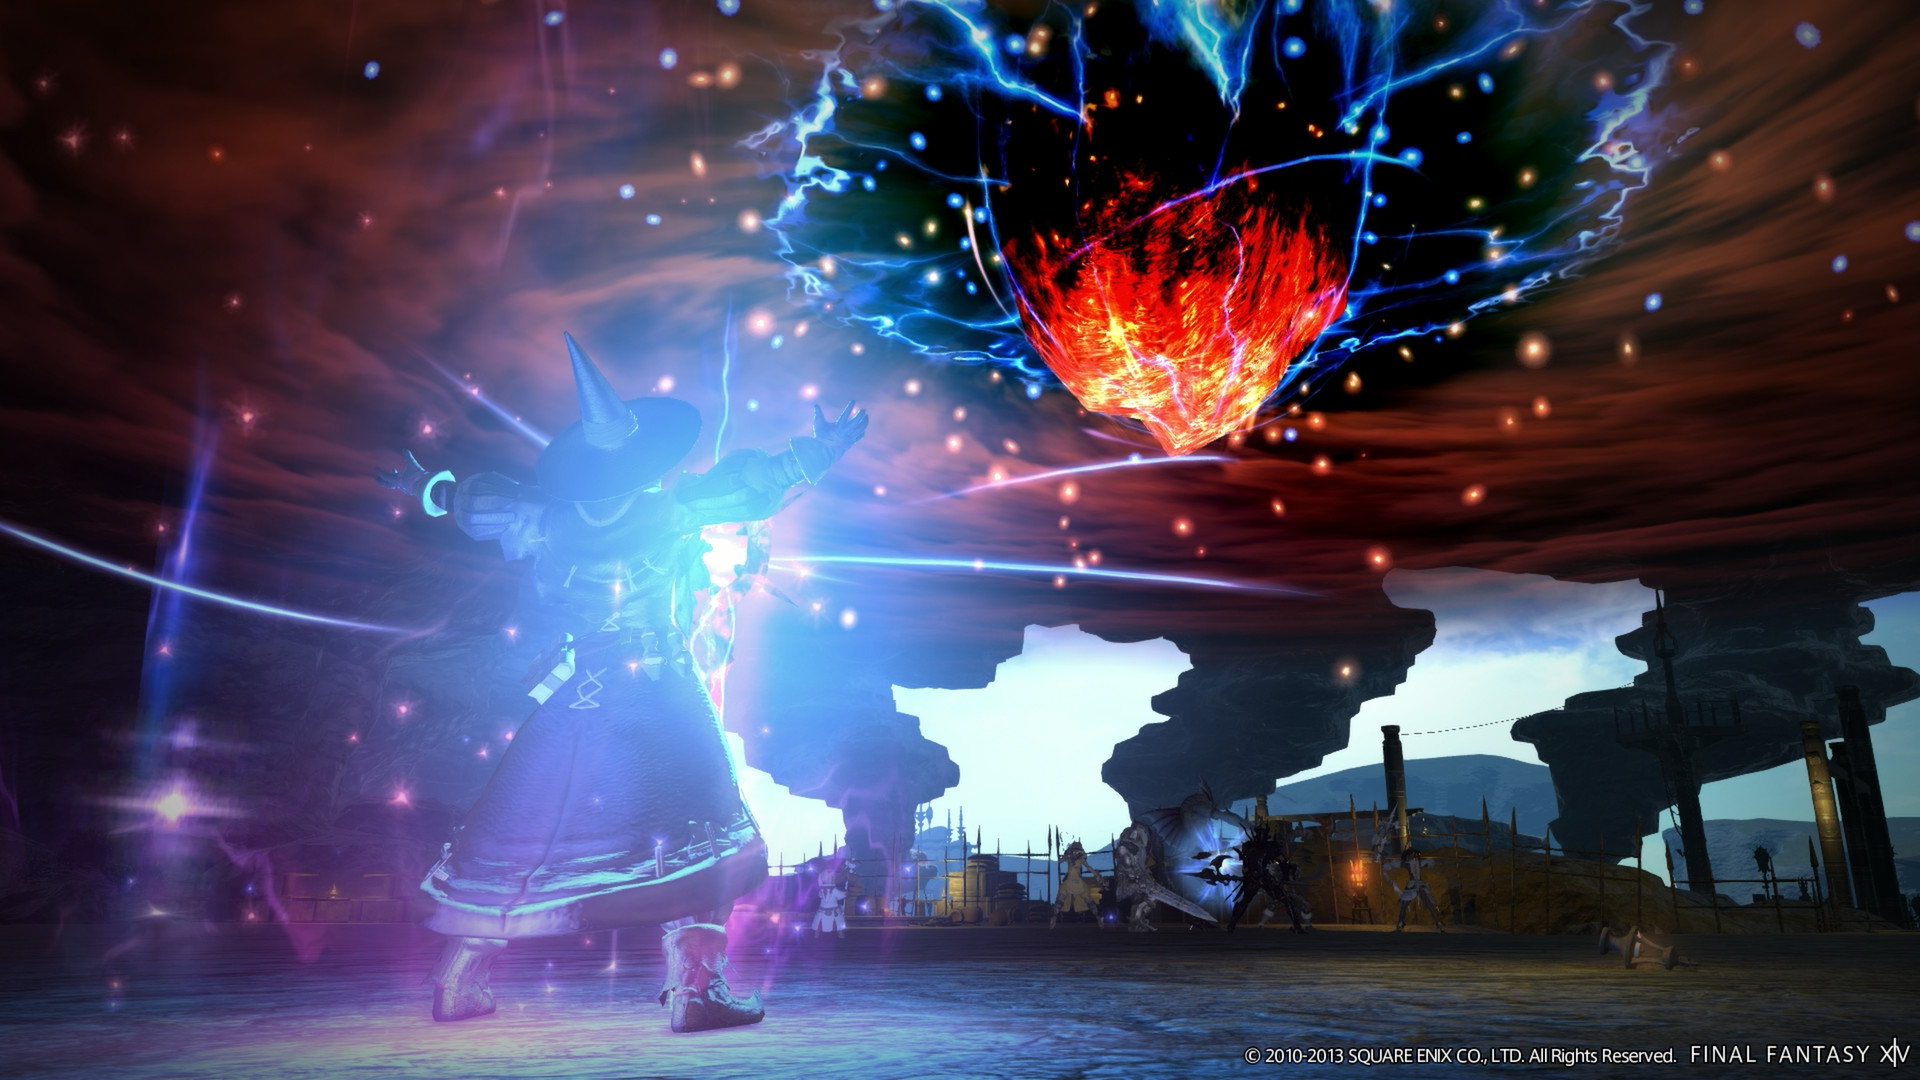 FINAL FANTASY XIV: A Realm Reborn PC system requirements